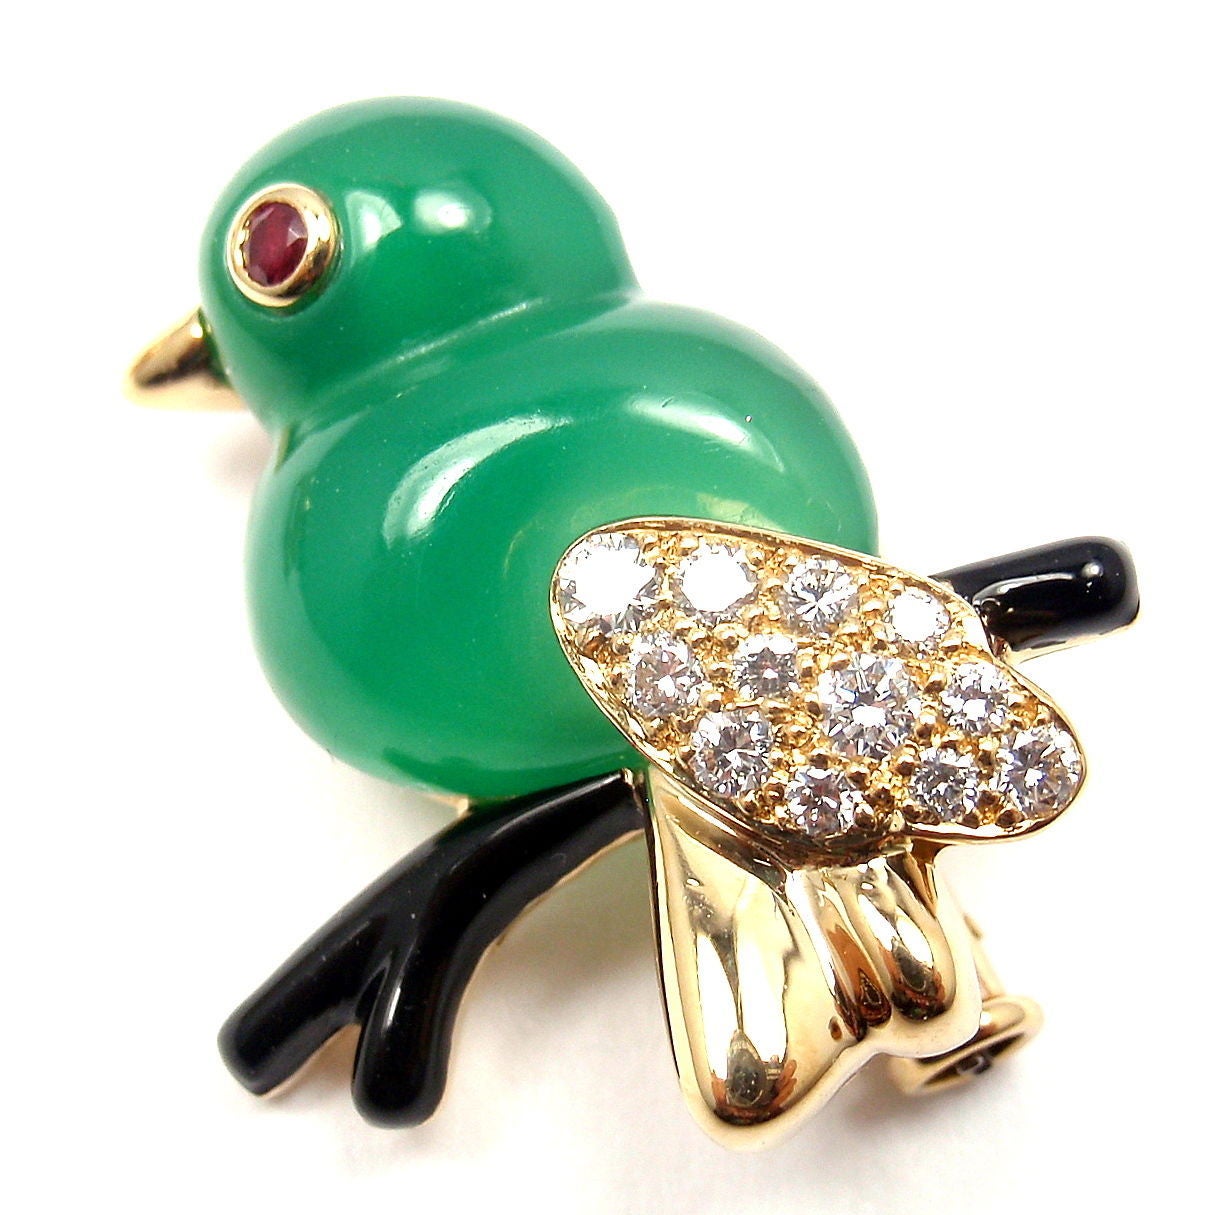 18k Yellow Gold Diamond Ruby Black Onyx & Chalcedony Set Of Two Bird Pins Brooches by Cartier.
Each brooch has 12 round brilliant cut diamonds VVS1 clarity, E color. total weight in both .50ct
2 rubies
onyx & chalcedony

Details:
Weight: Total